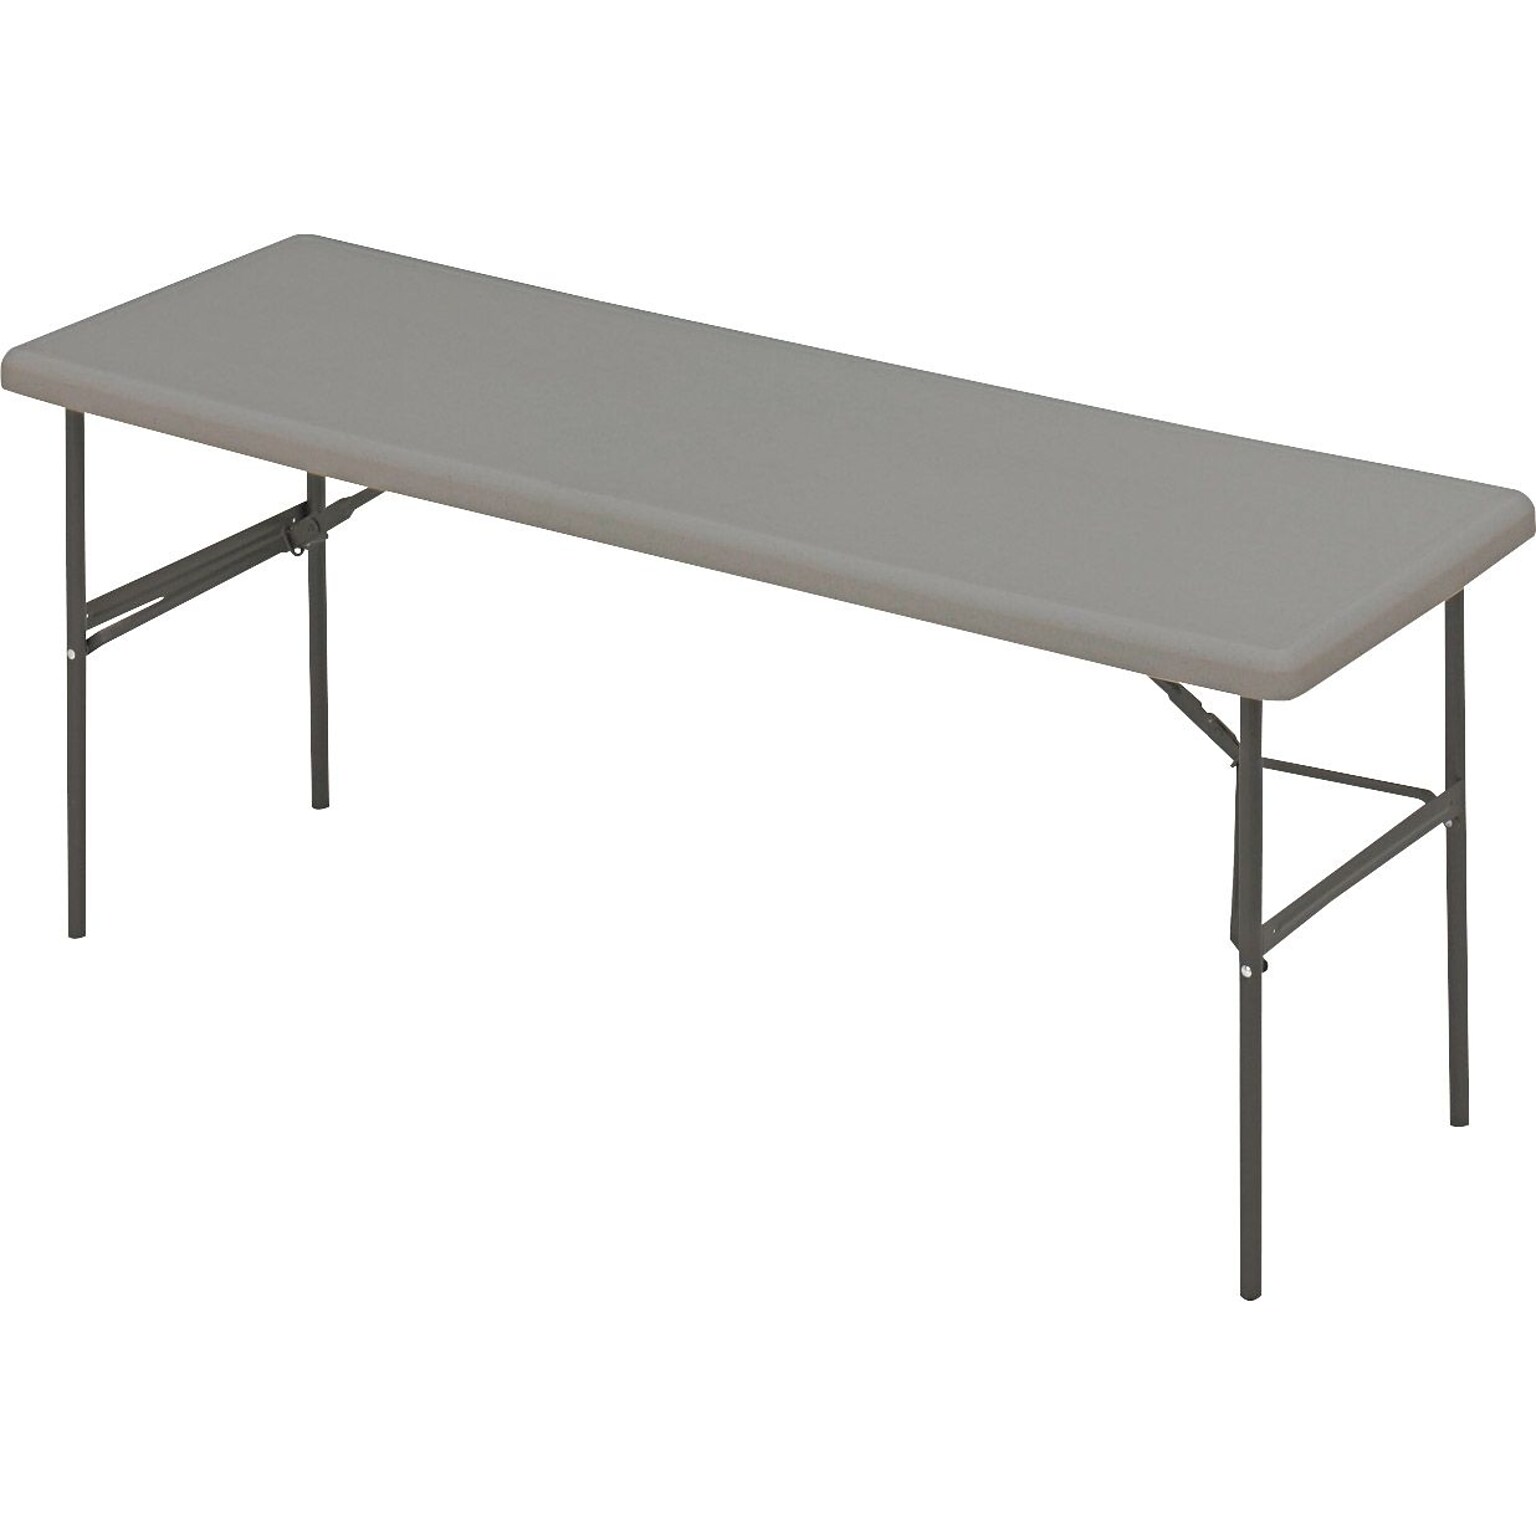 Iceberg® IndestrucTables TOO™ 1200 Series Folding Table, 72x24, Charcoal